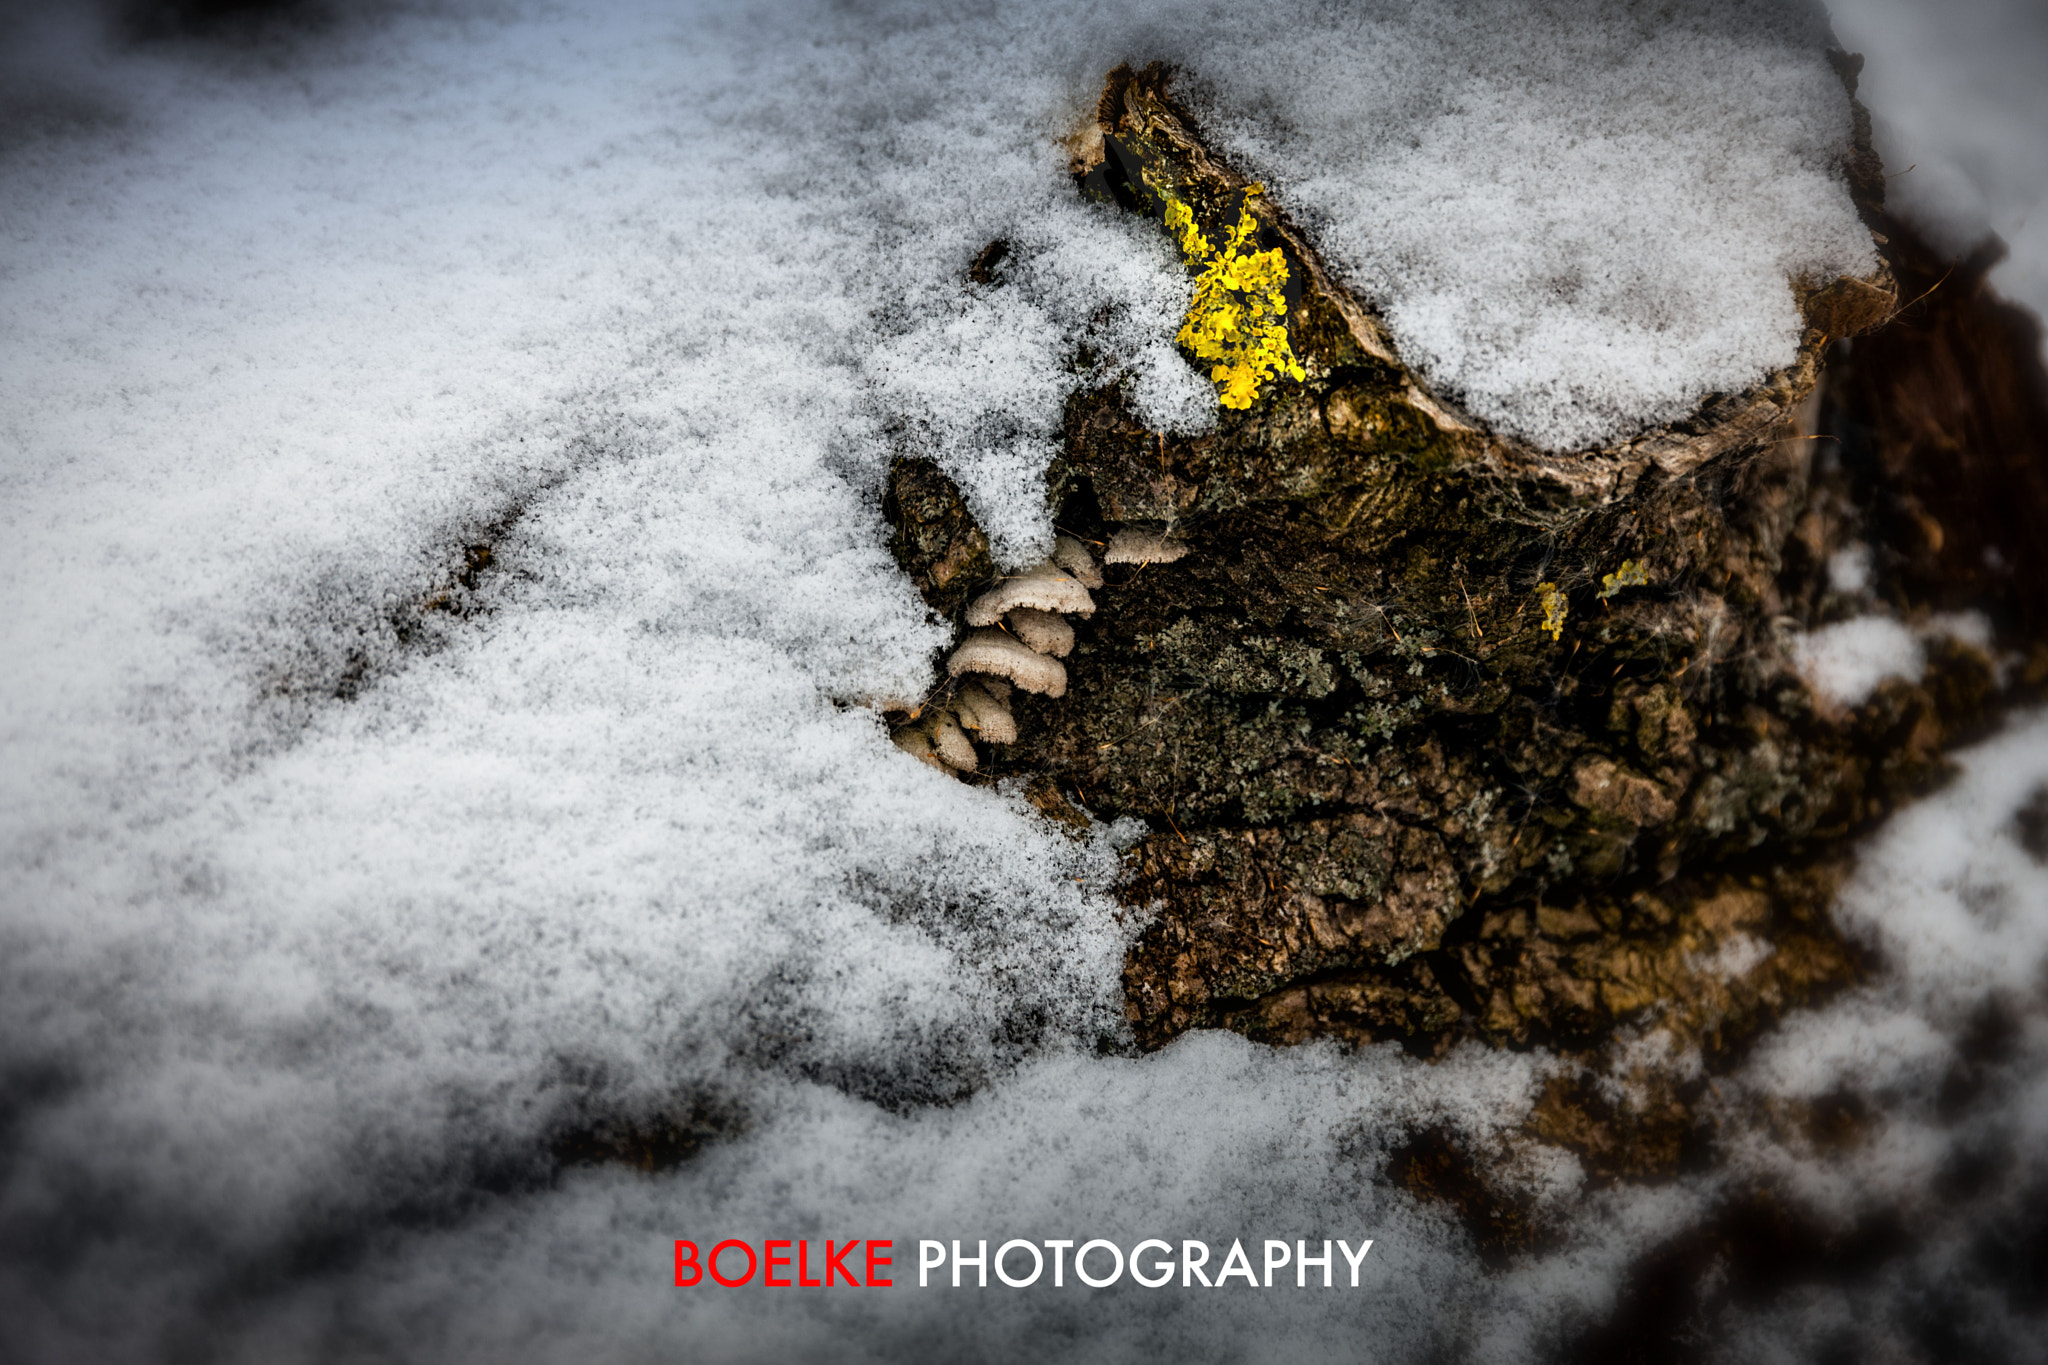 Canon EOS-1Ds Mark III + Sigma 24-105mm f/4 DG OS HSM | A sample photo. Yellow point in the snow photography